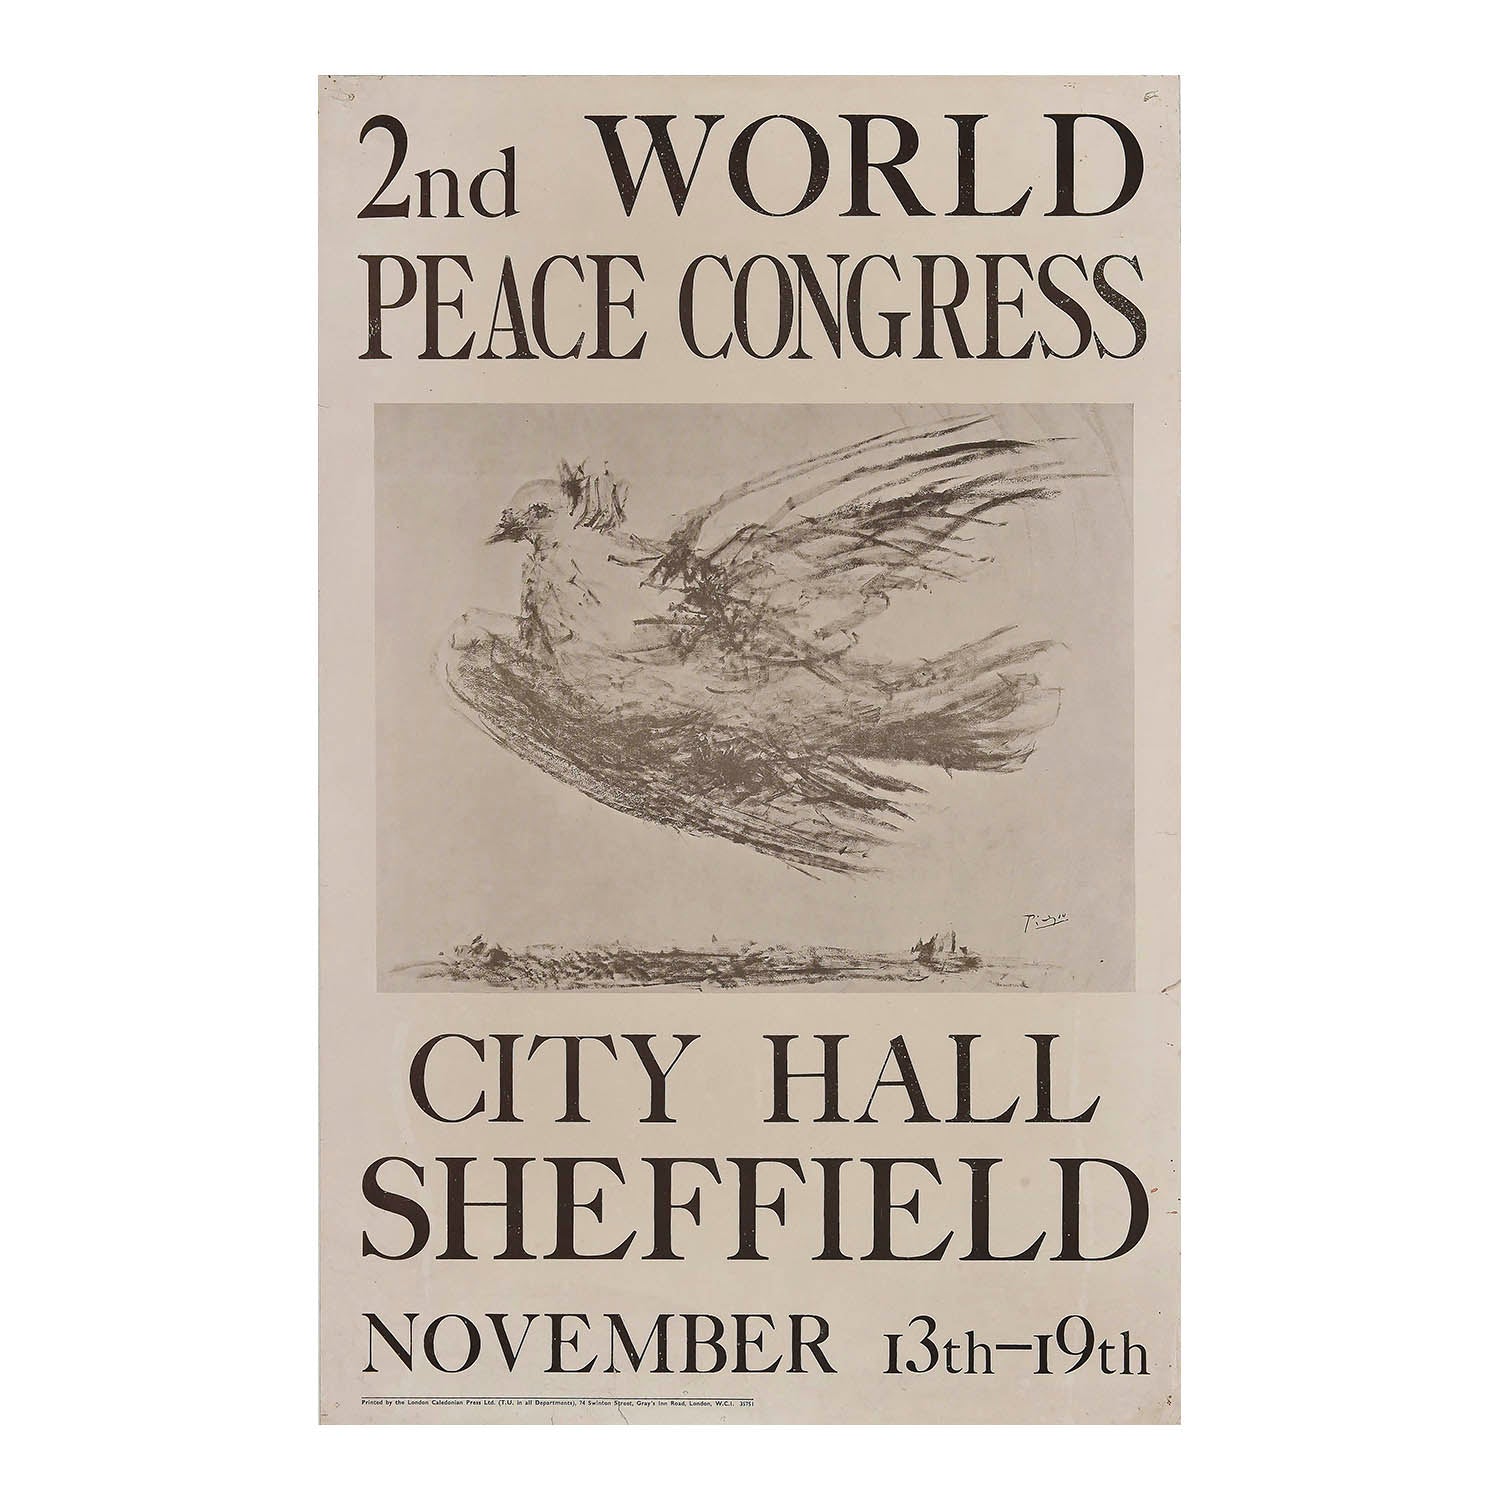 extremely rare poster for the Second World Congress of the Partisans of Peace (WCPP), featuring the Dove of Peace designed specifically for the event by Pablo Picasso, 1950.